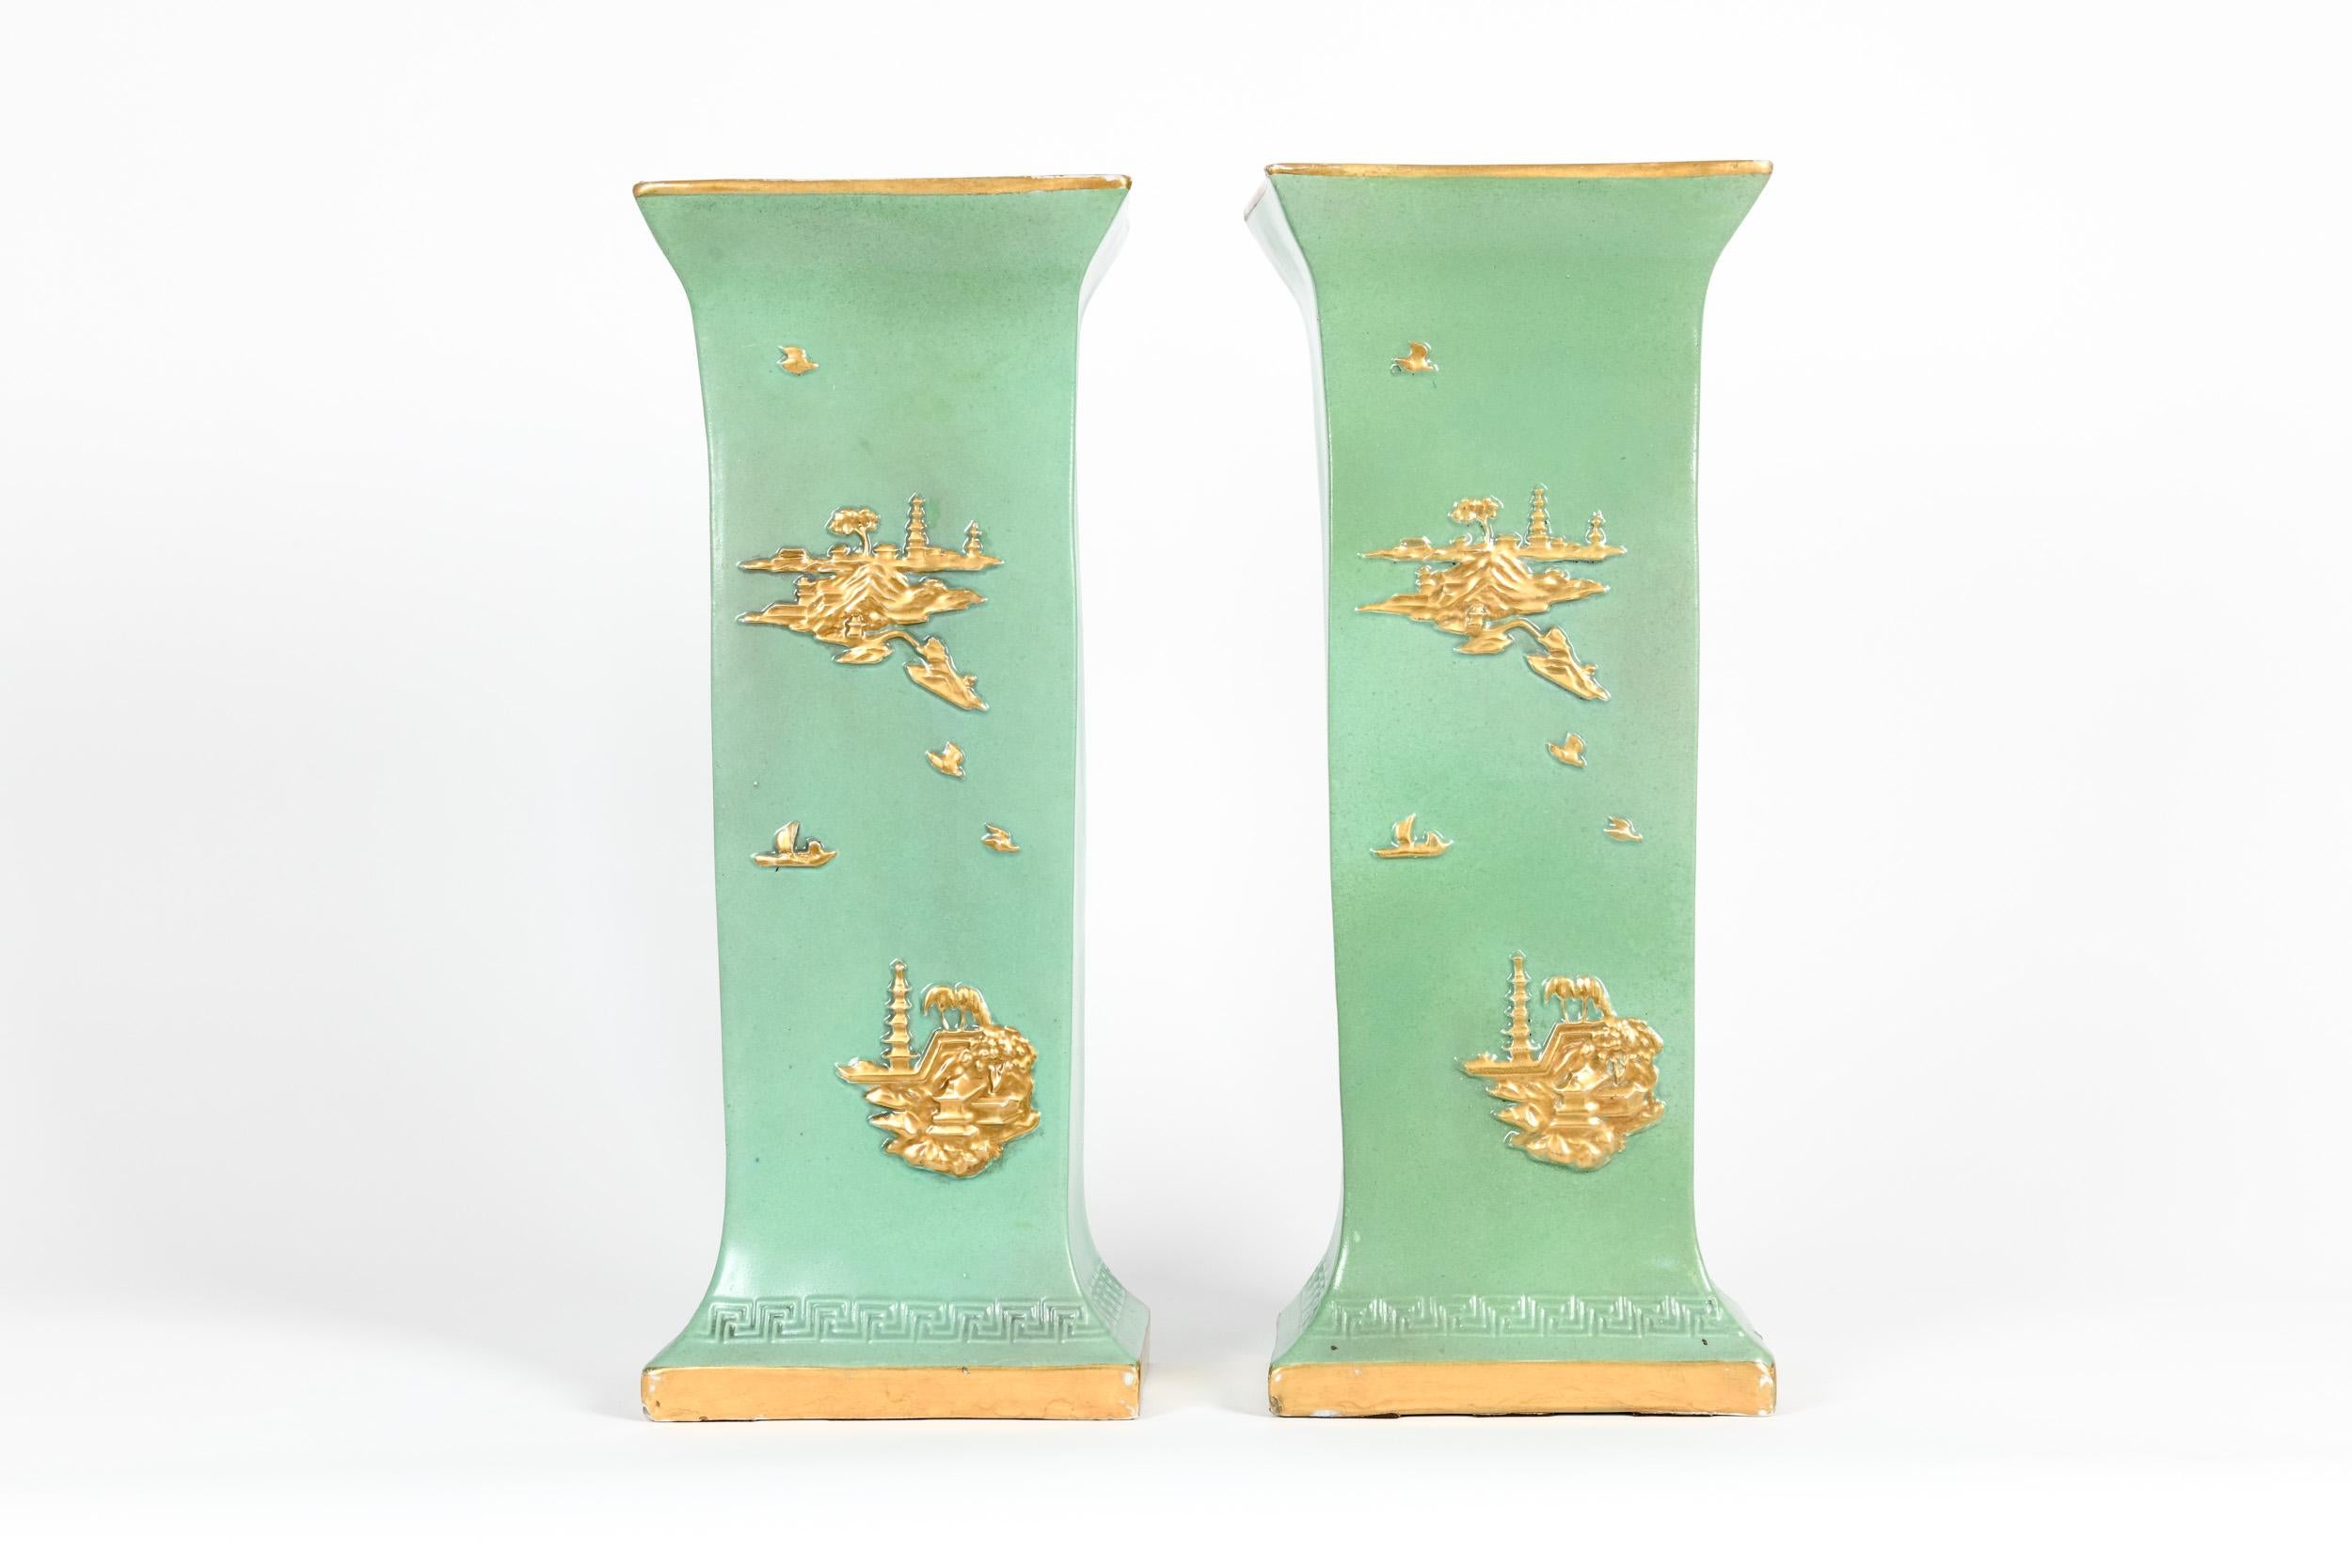 English pair glazed and parcel gilt design details porcelain decorative vases/pieces with asiatic details. Each piece is in great vintage condition with minor wear consistent with age/use. Each piece stand about 18.5 inches high X 7. 5 inches X 5 .5